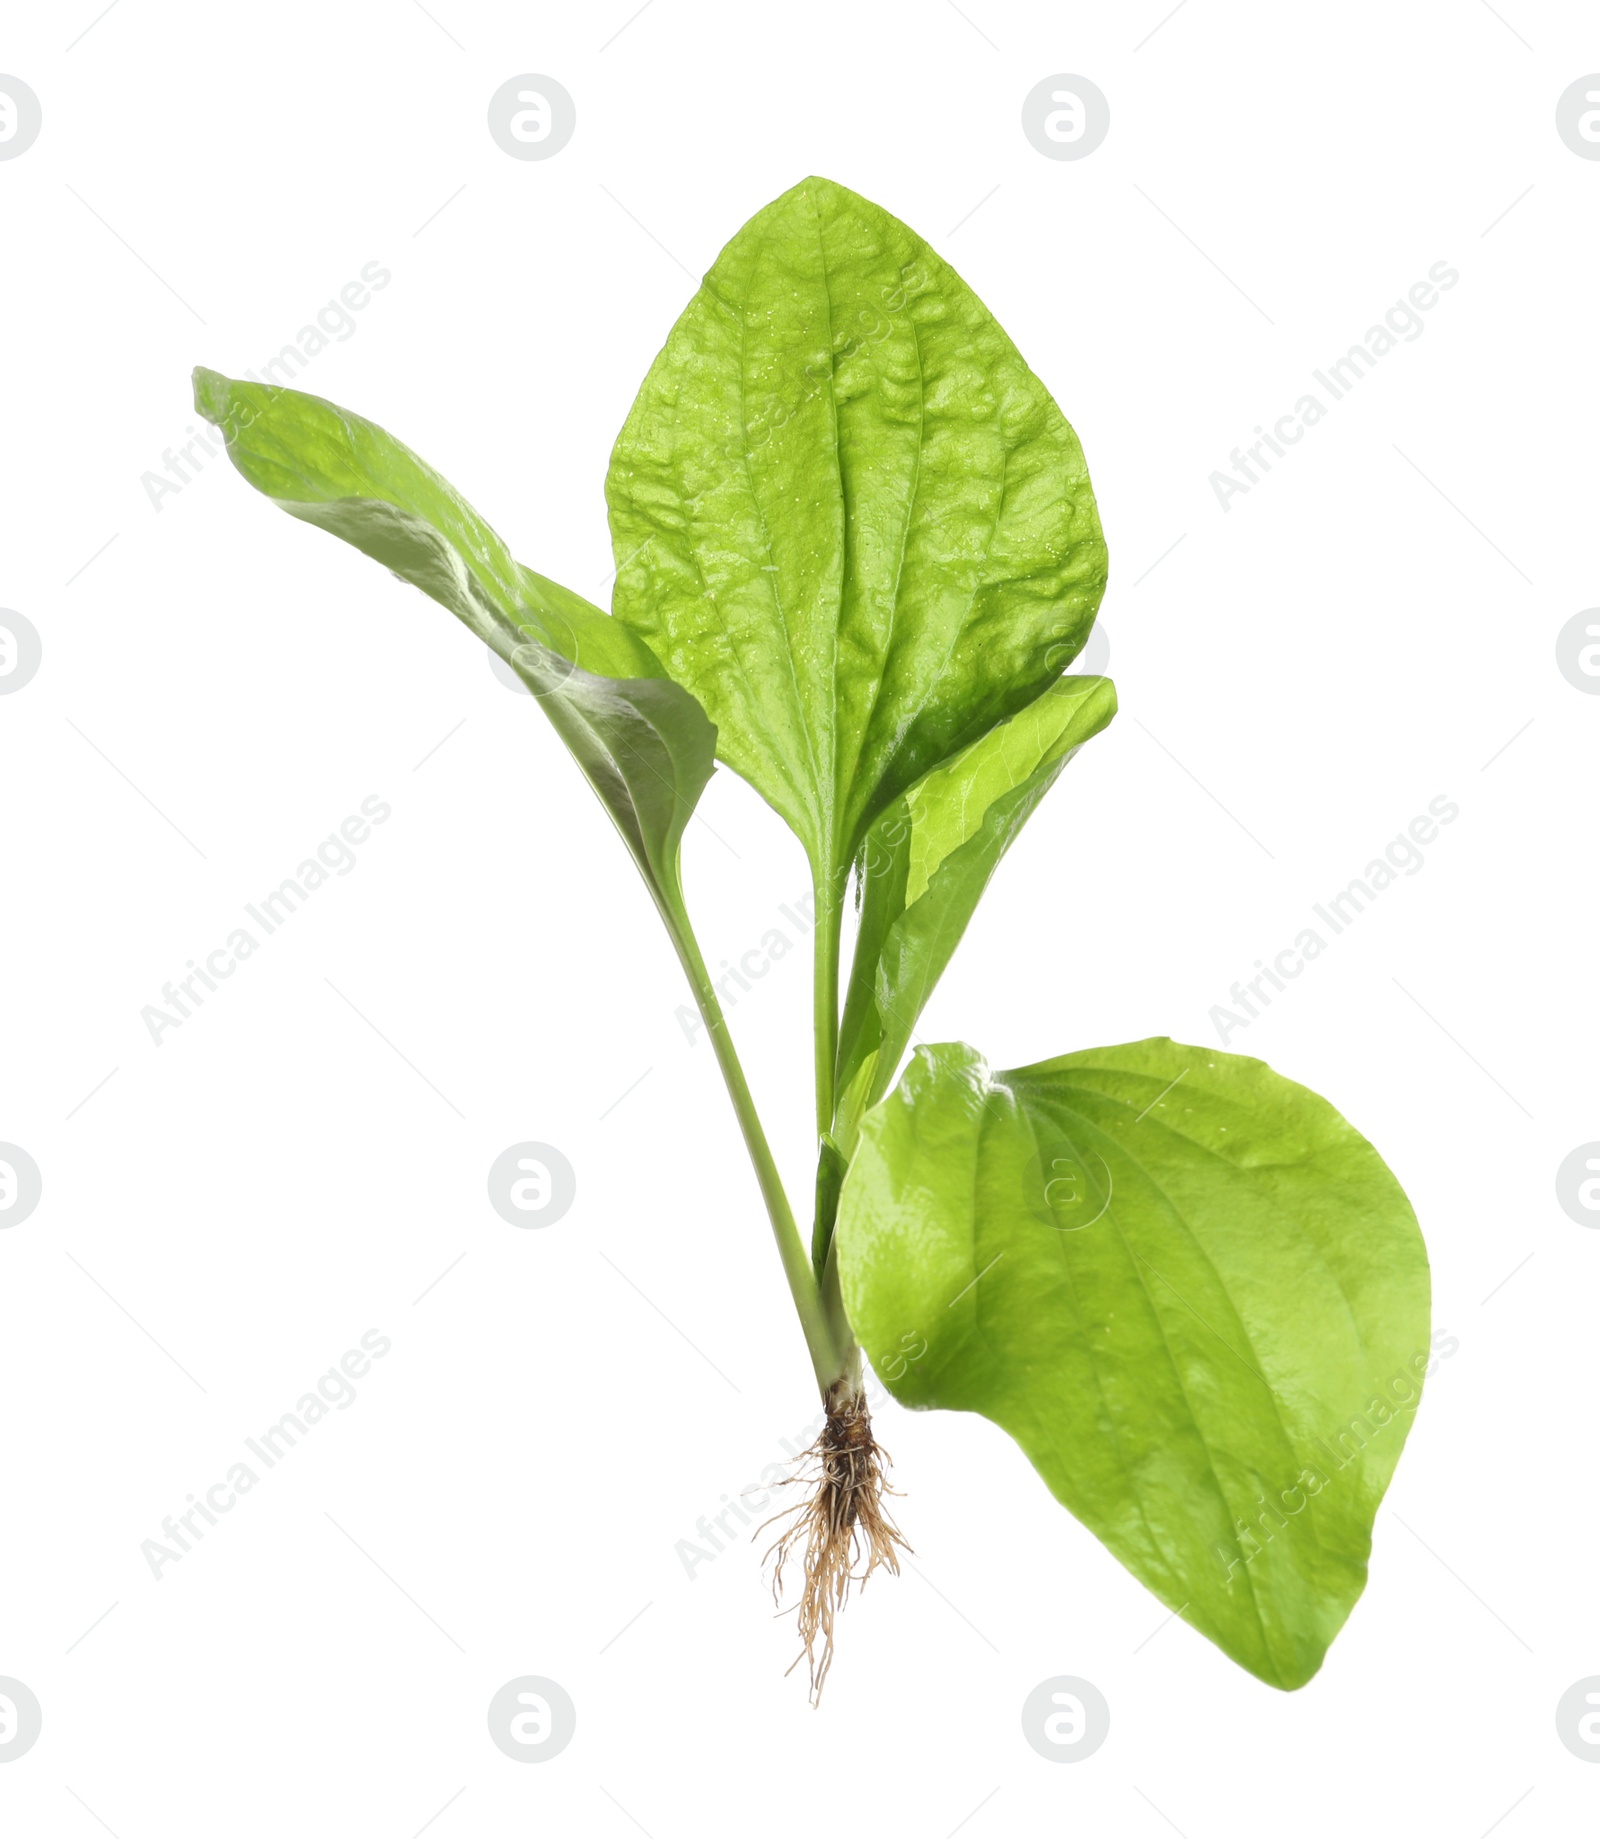 Photo of Broadleaf plantain on white background. Medicinal herb